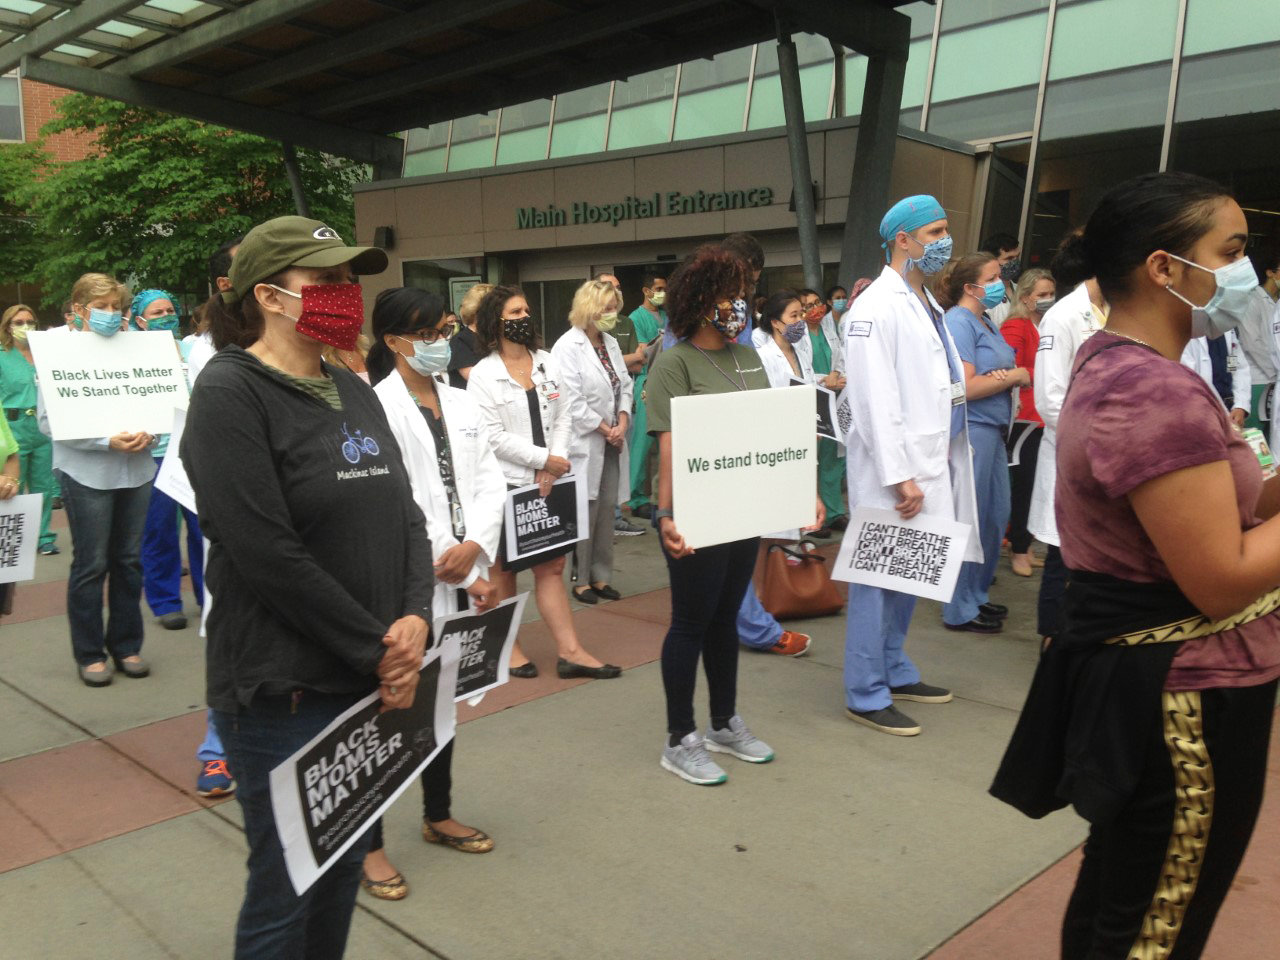 The signs displayed and the protesters provided a diverse tableau of nurses, doctors, nurse midwives and administrators.